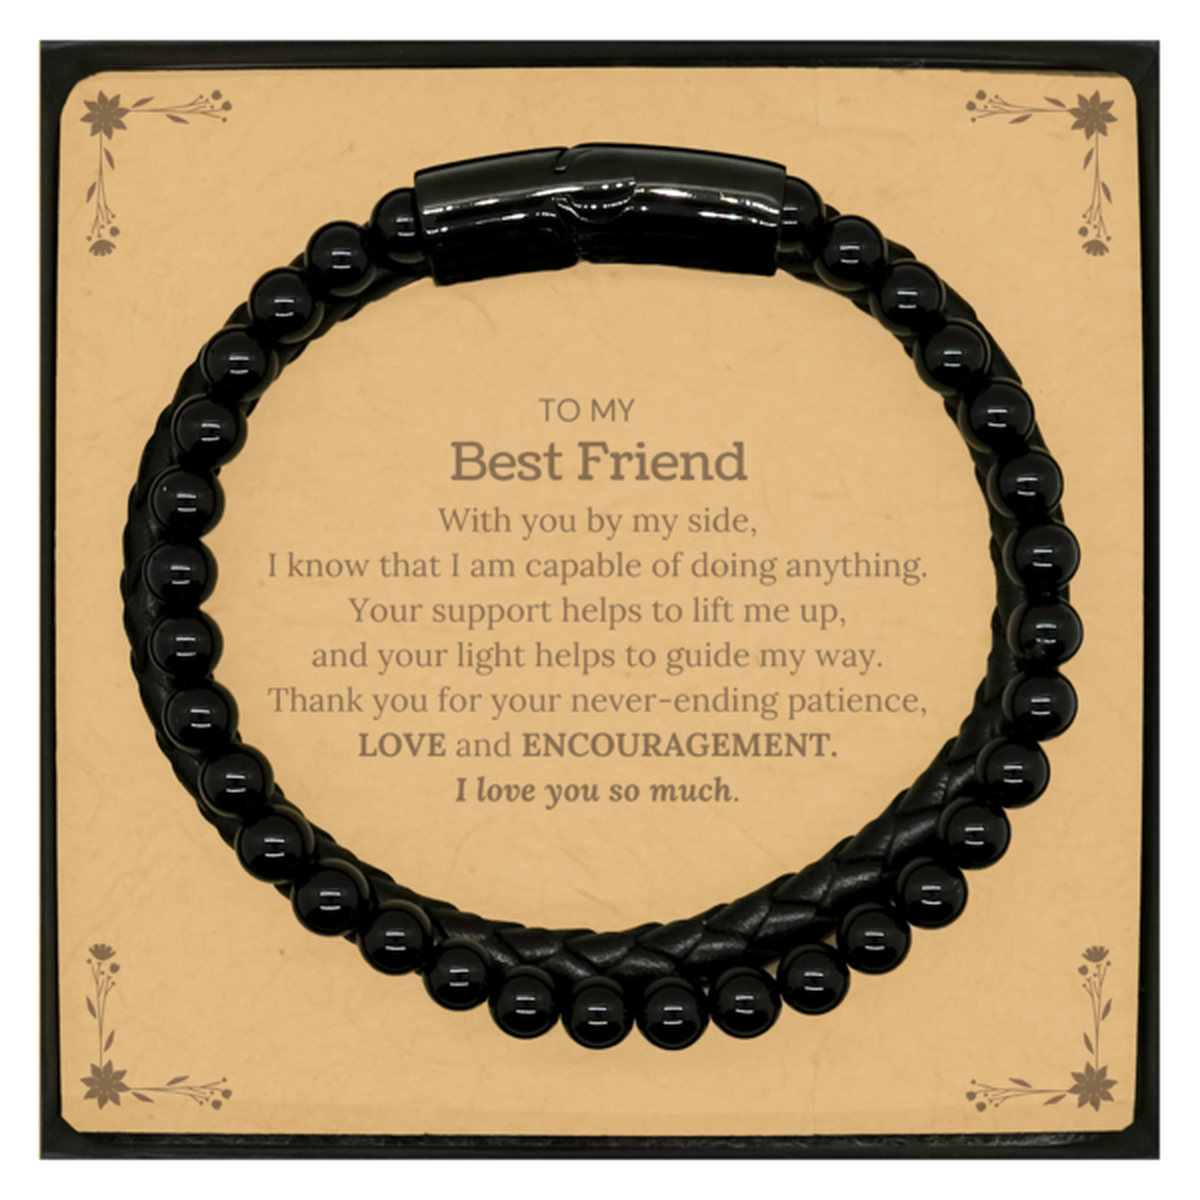 Appreciation Best Friend Stone Leather Bracelets Gifts, To My Best Friend Birthday Christmas Wedding Keepsake Gifts for Best Friend With you by my side, I know that I am capable of doing anything. I love you so much